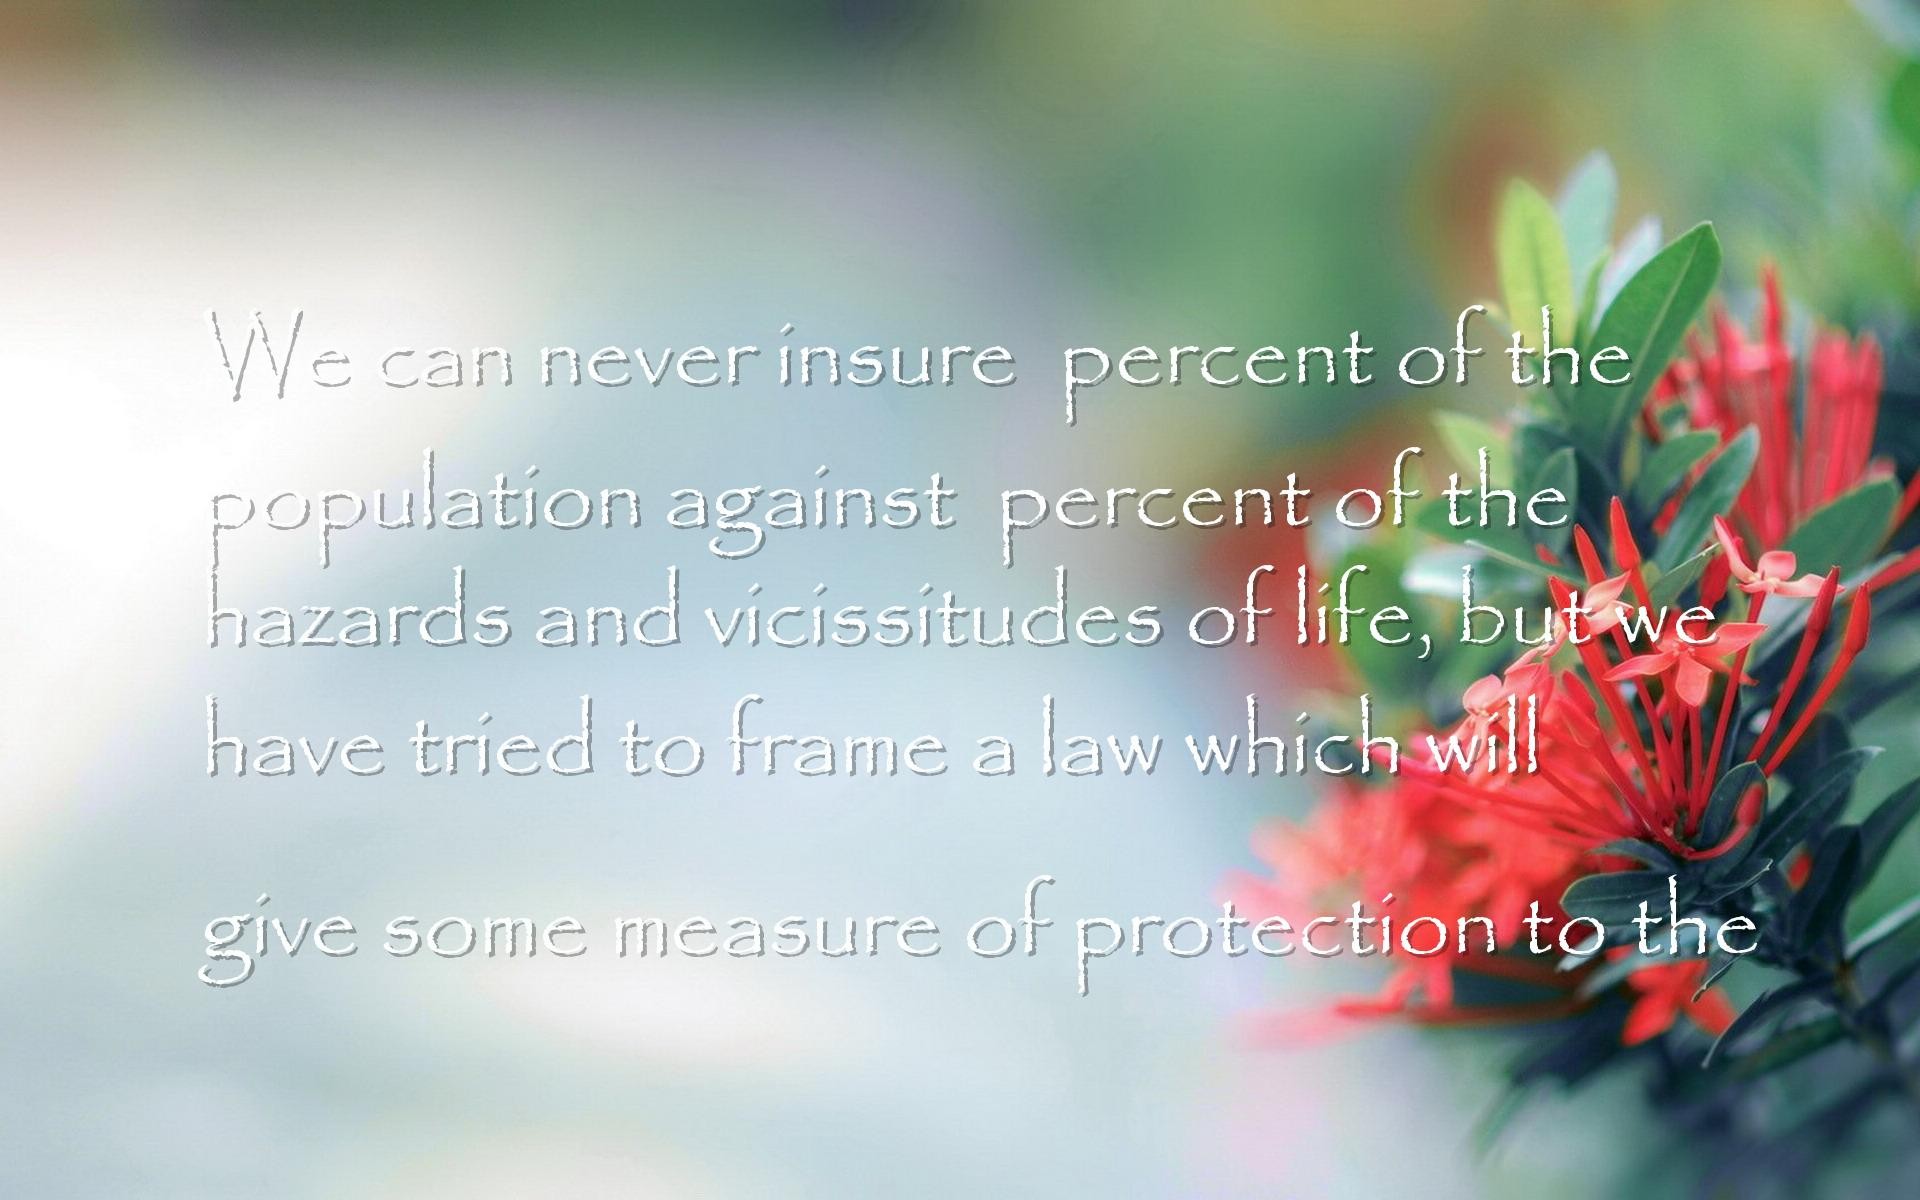 We can never insure 100 percent of the population against 100 percent of the hazards and vicissitudes of life, ...